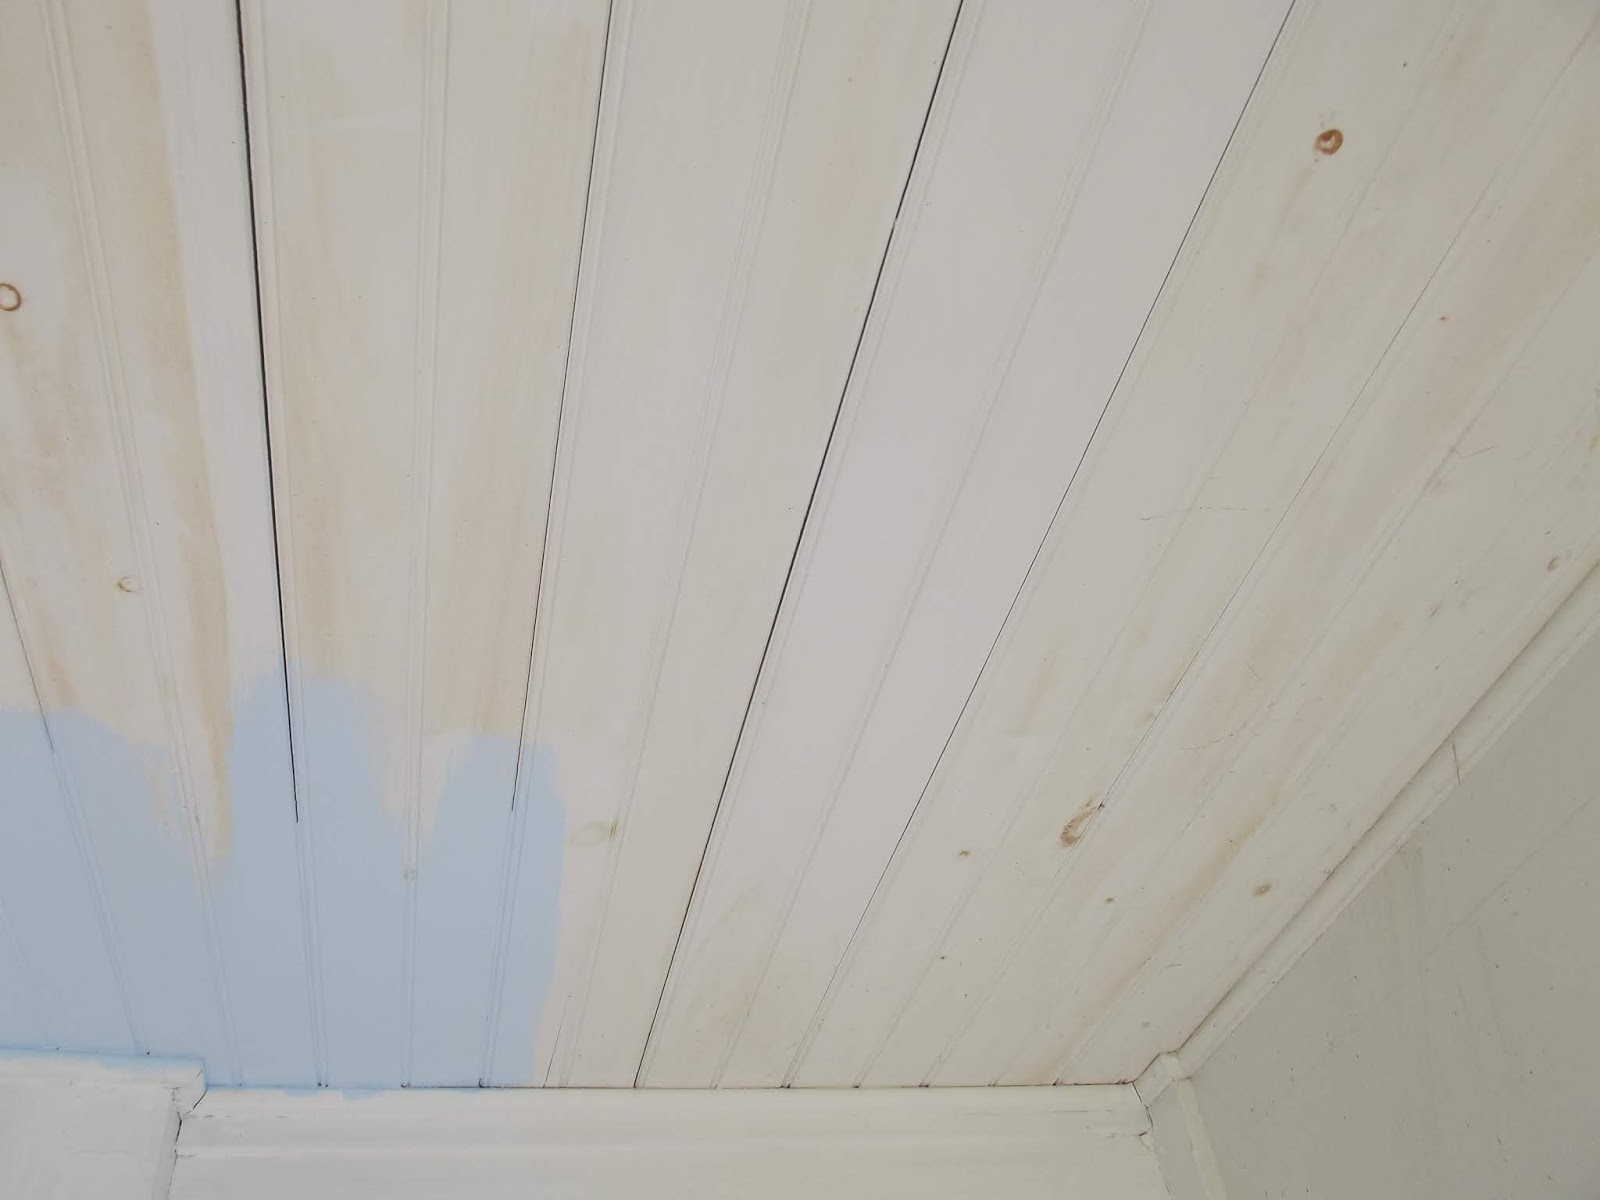 The Old Granite Step Painting The Porch Ceiling Blue